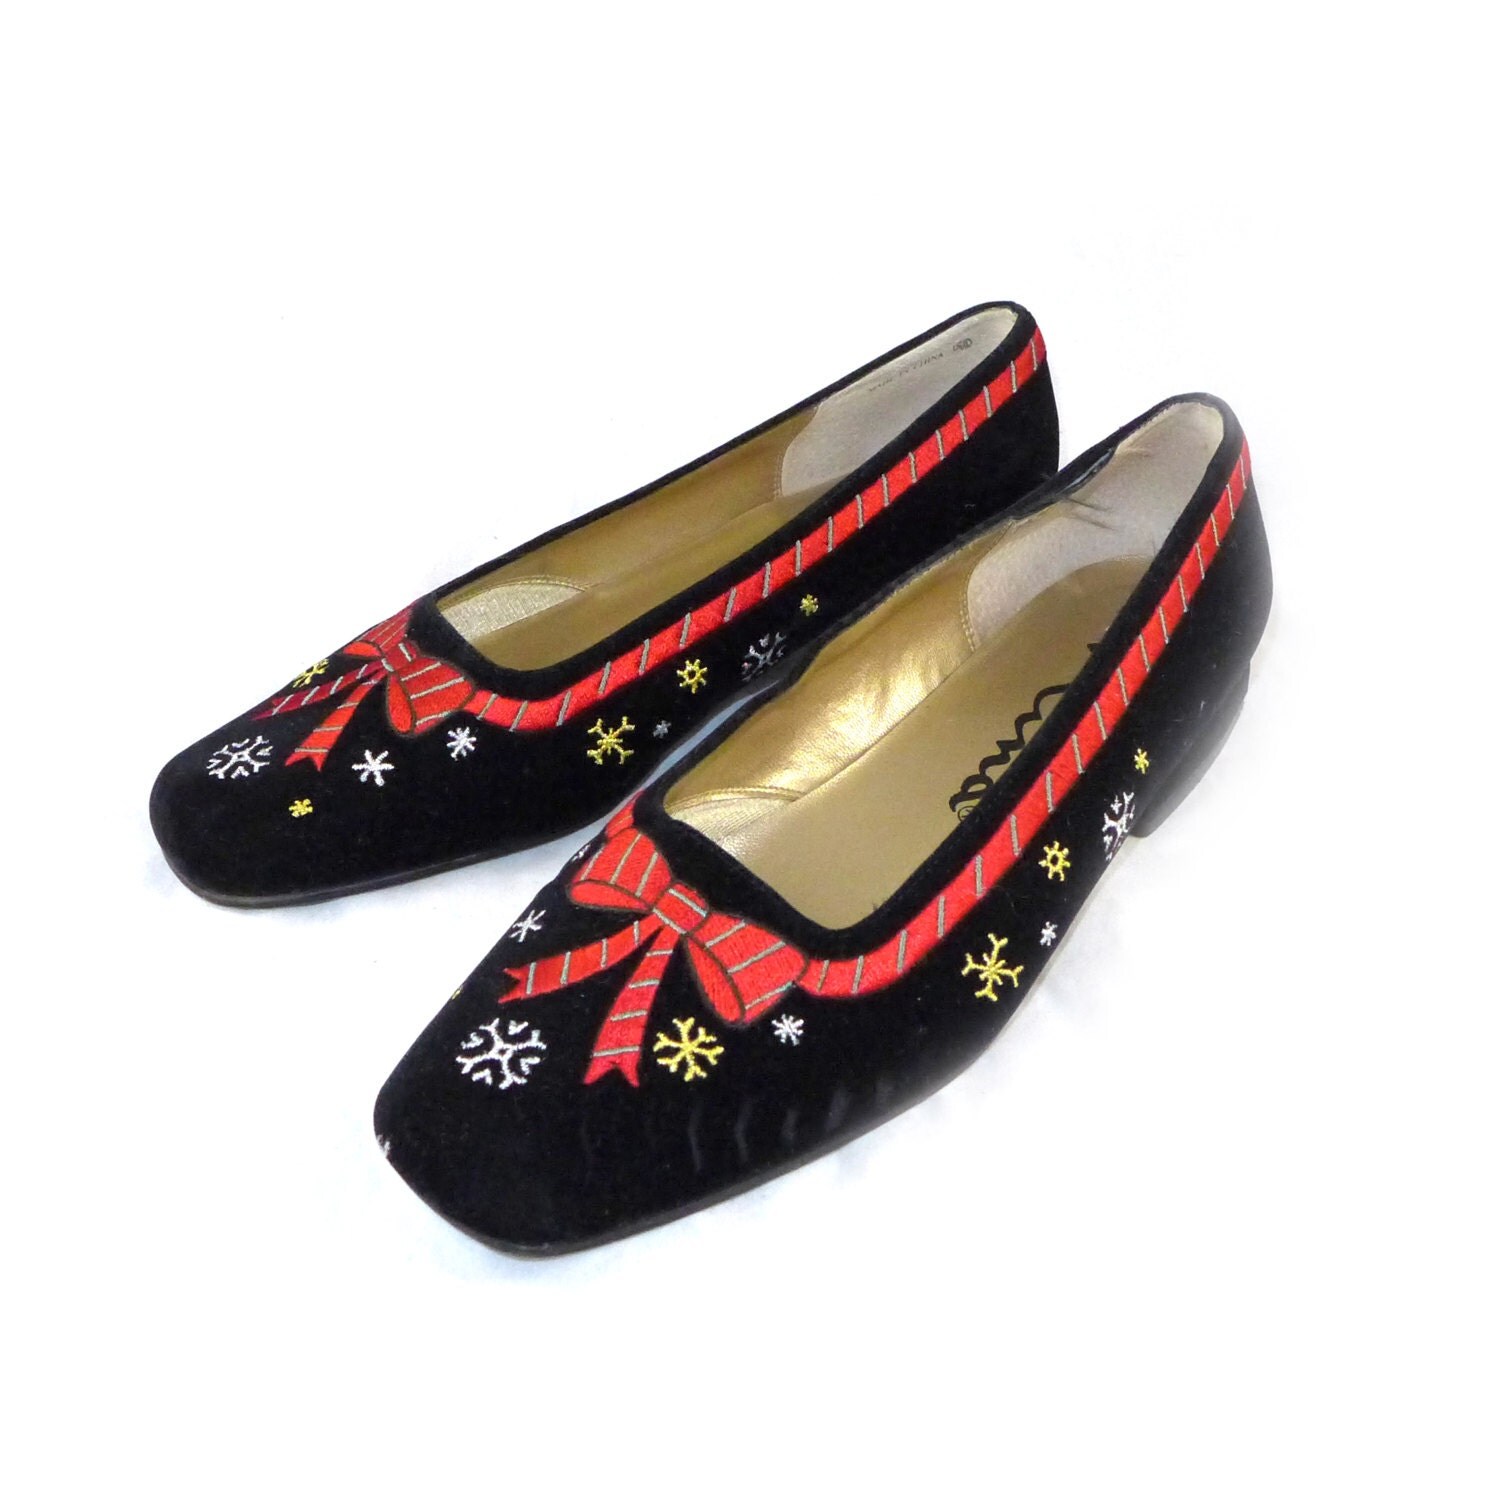 Black velvet Christmas shoes flats embroidered with a red